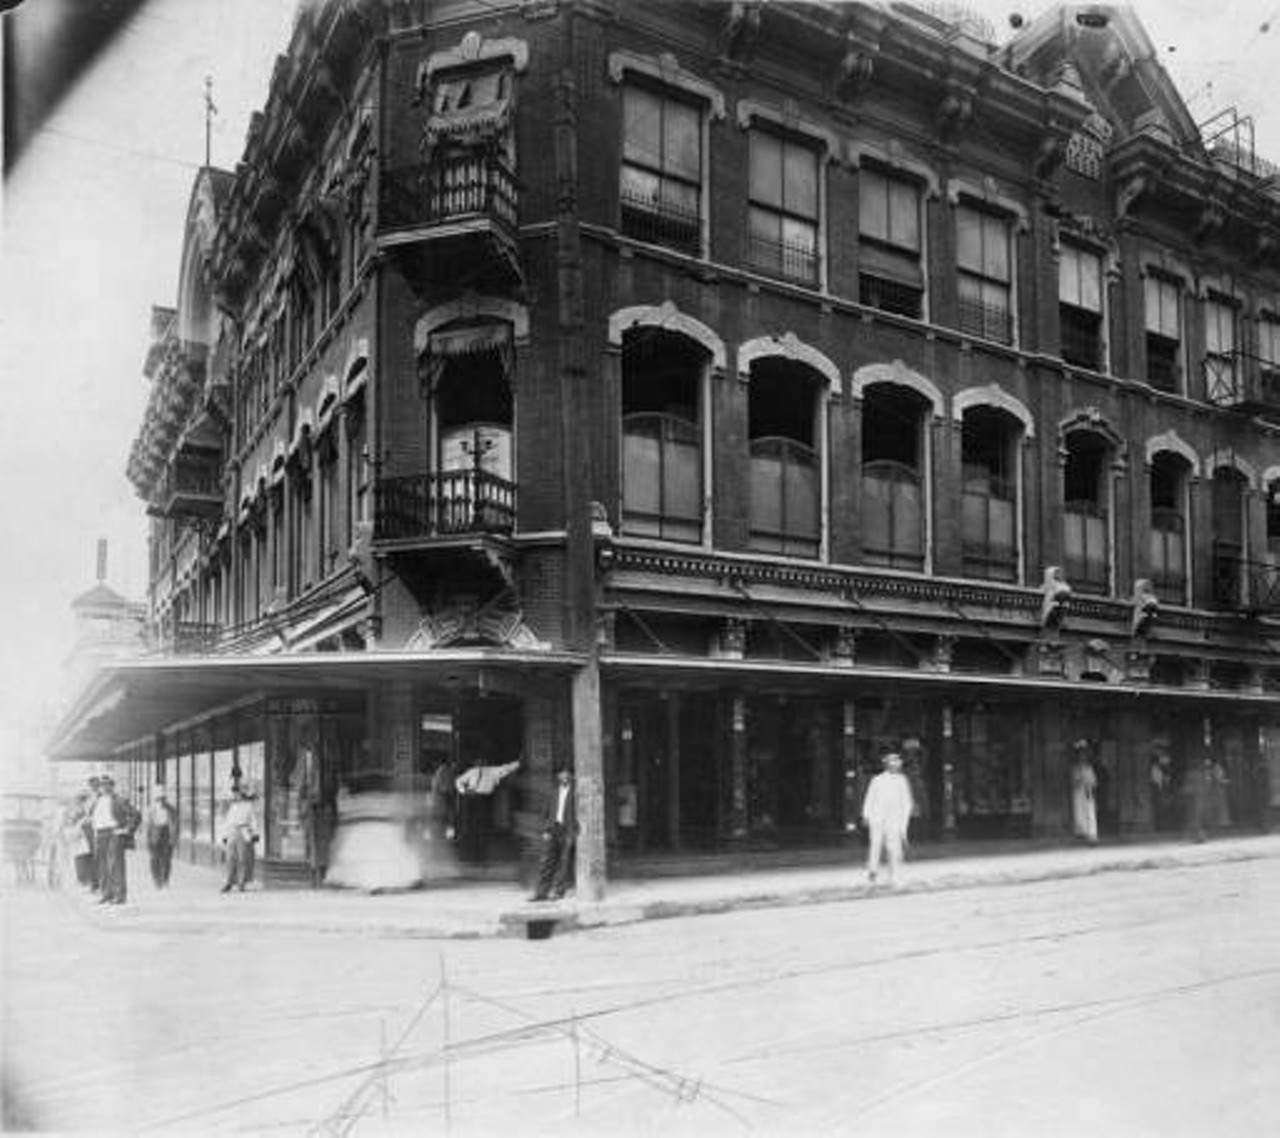 Circa 1913, The exterior of the Dullnig Building on the corner of East Commerce and North Alamo St.